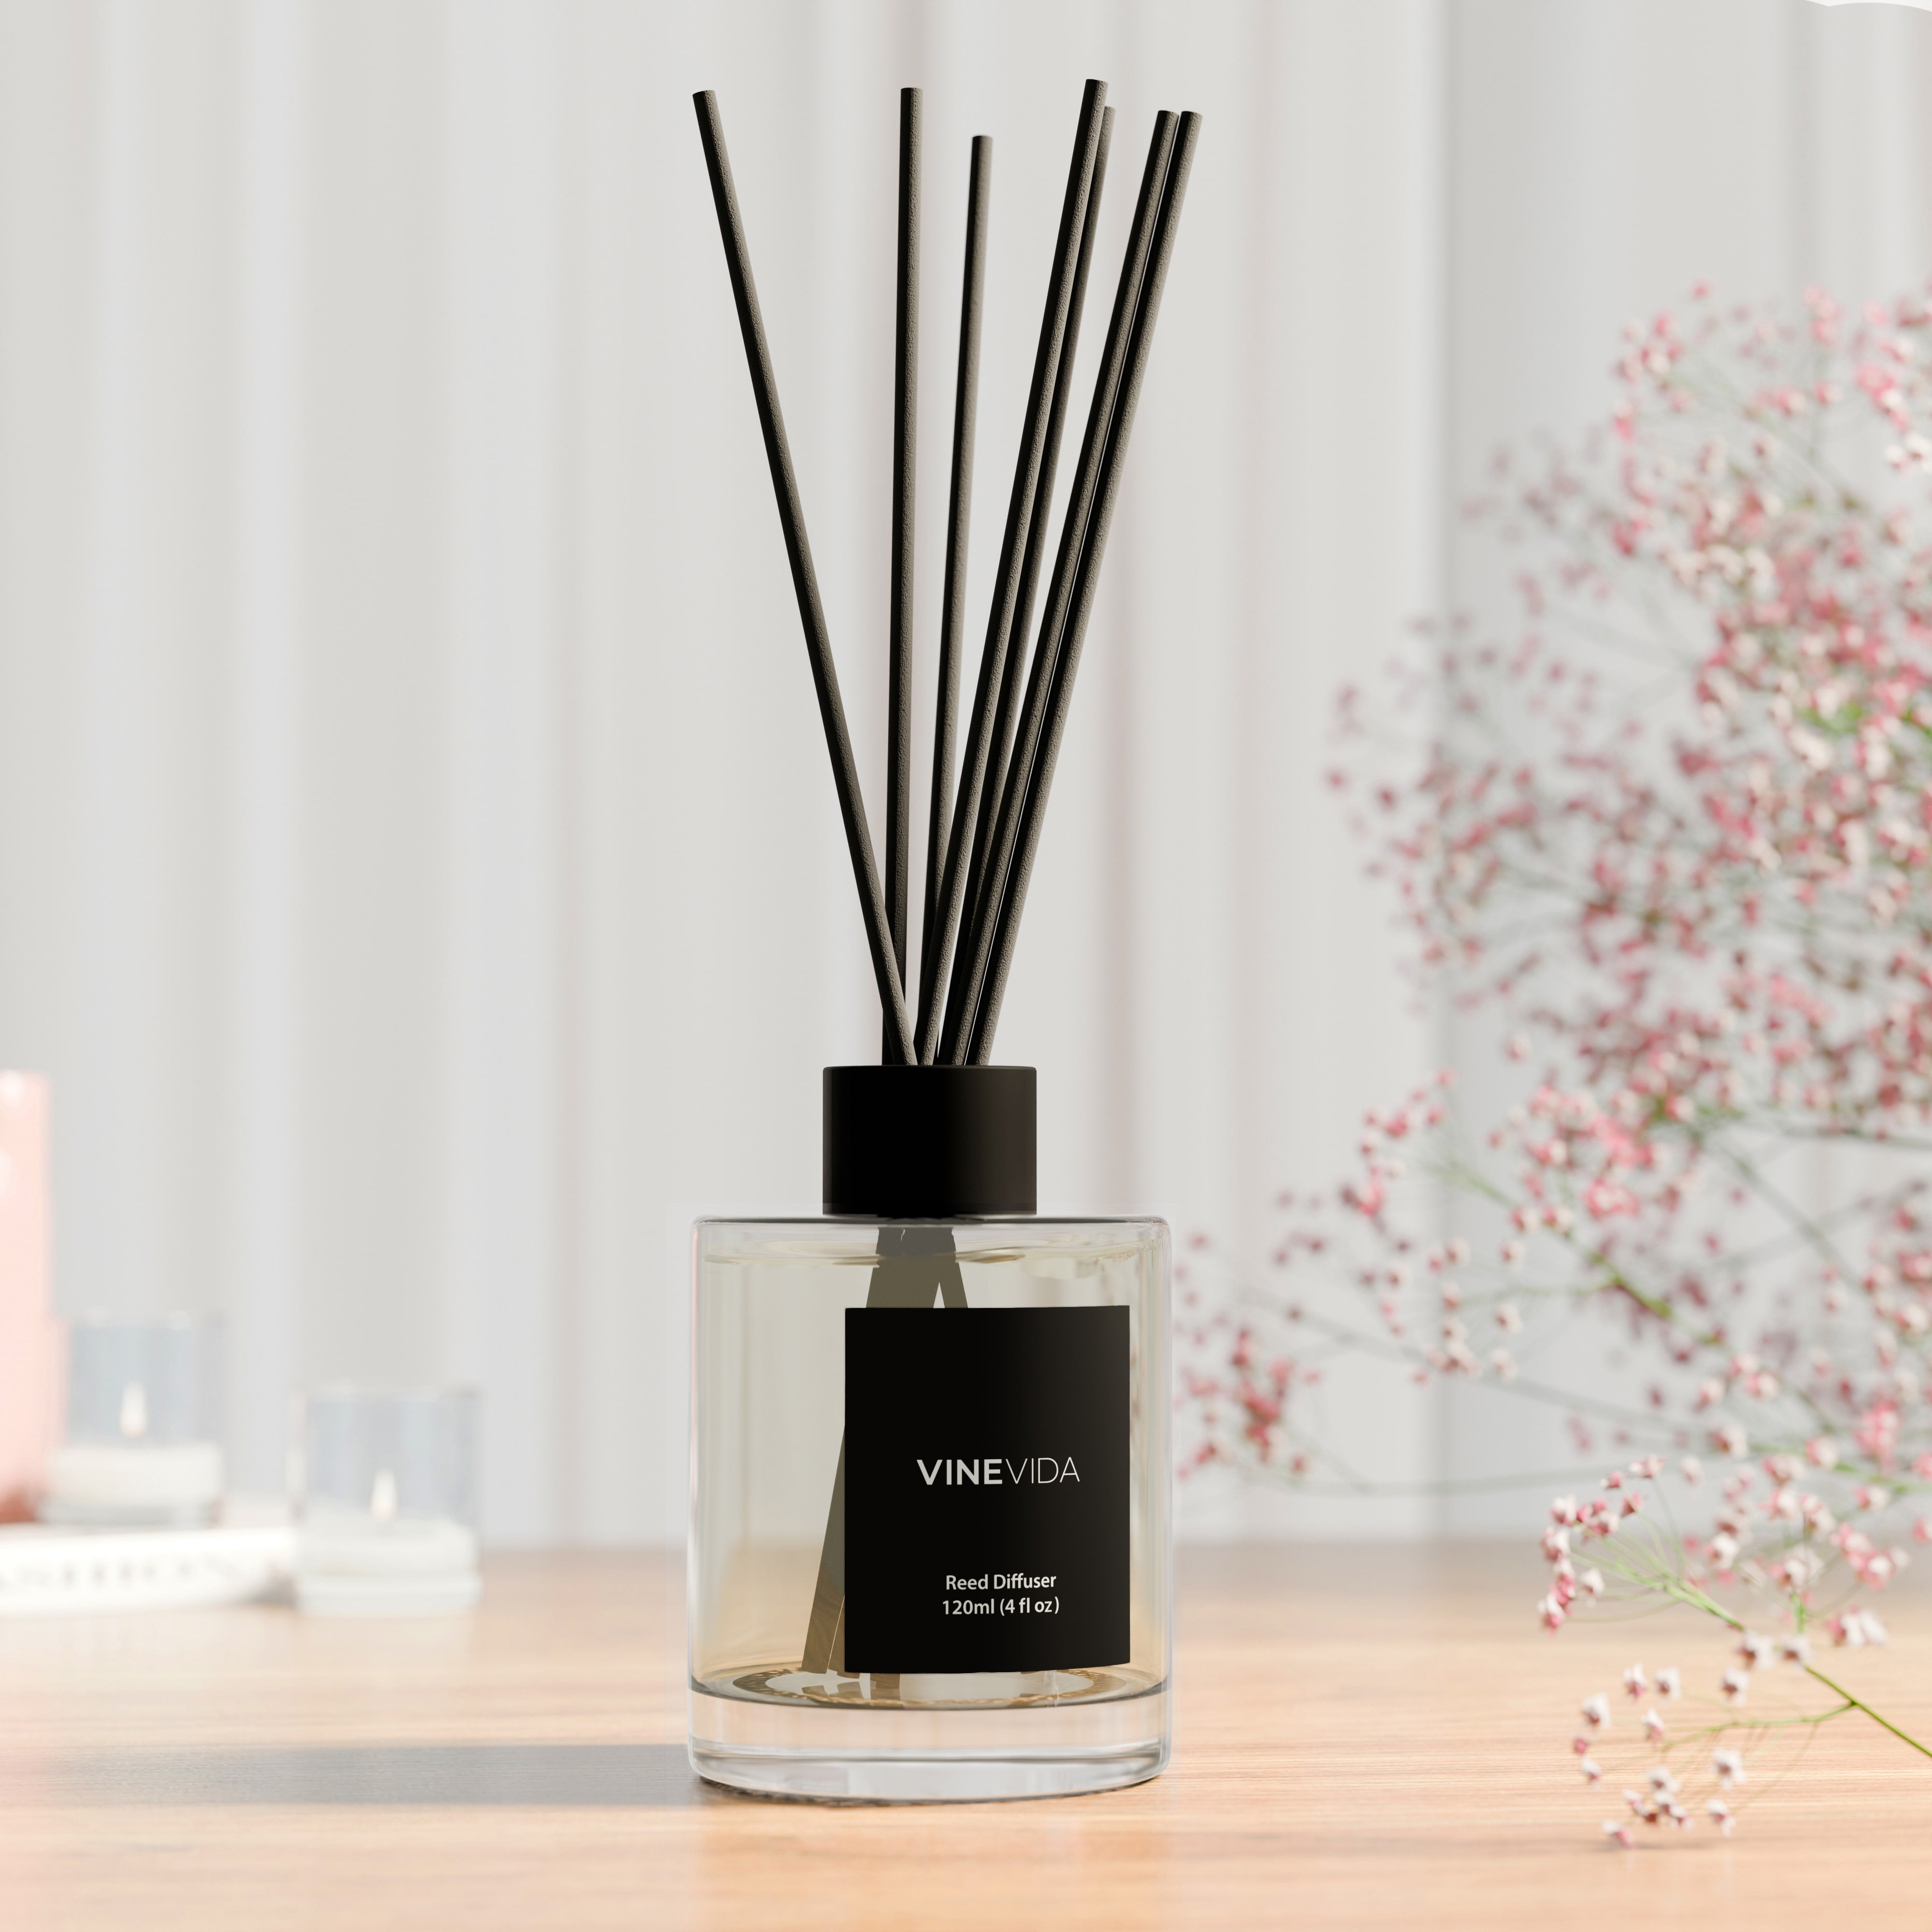 NO. 1019 Reed Diffuser - Inspired by: Sweetest Taboo & The Aria Hotel